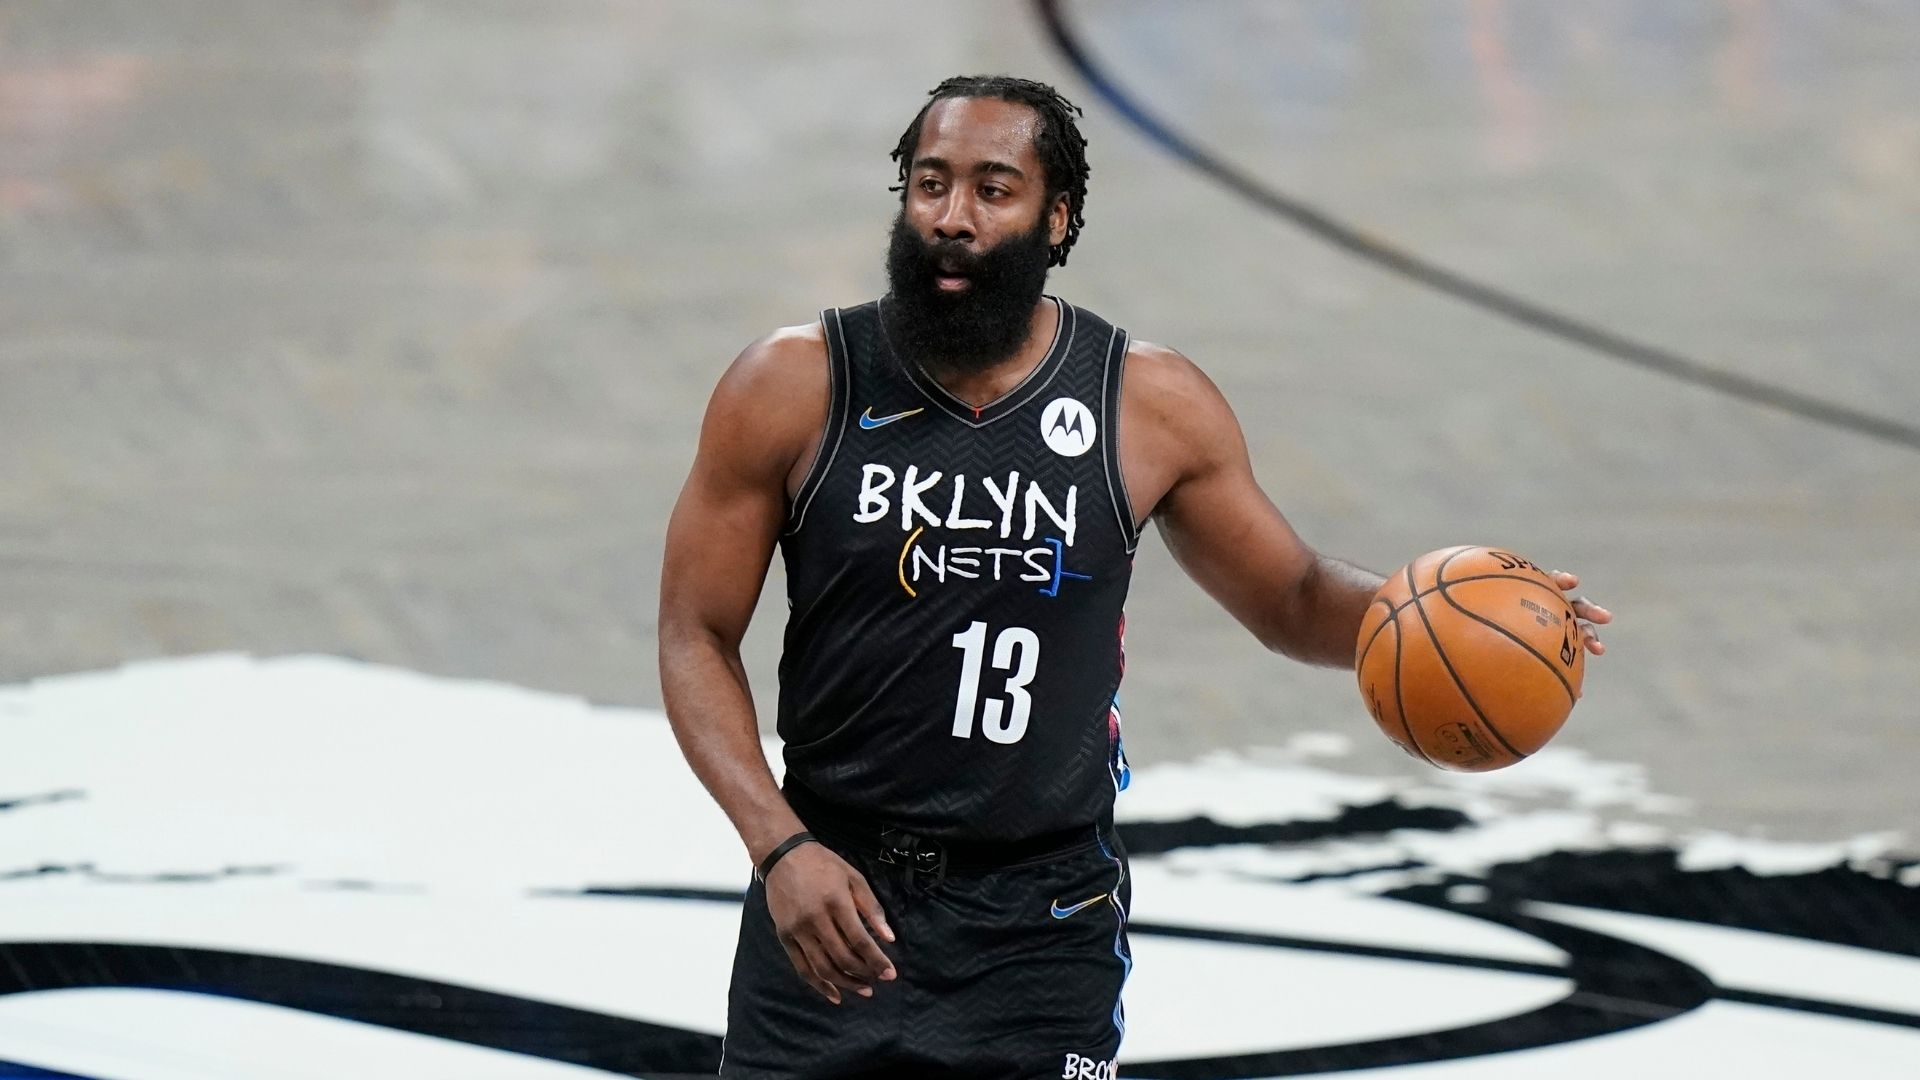 James Harden of the Nets